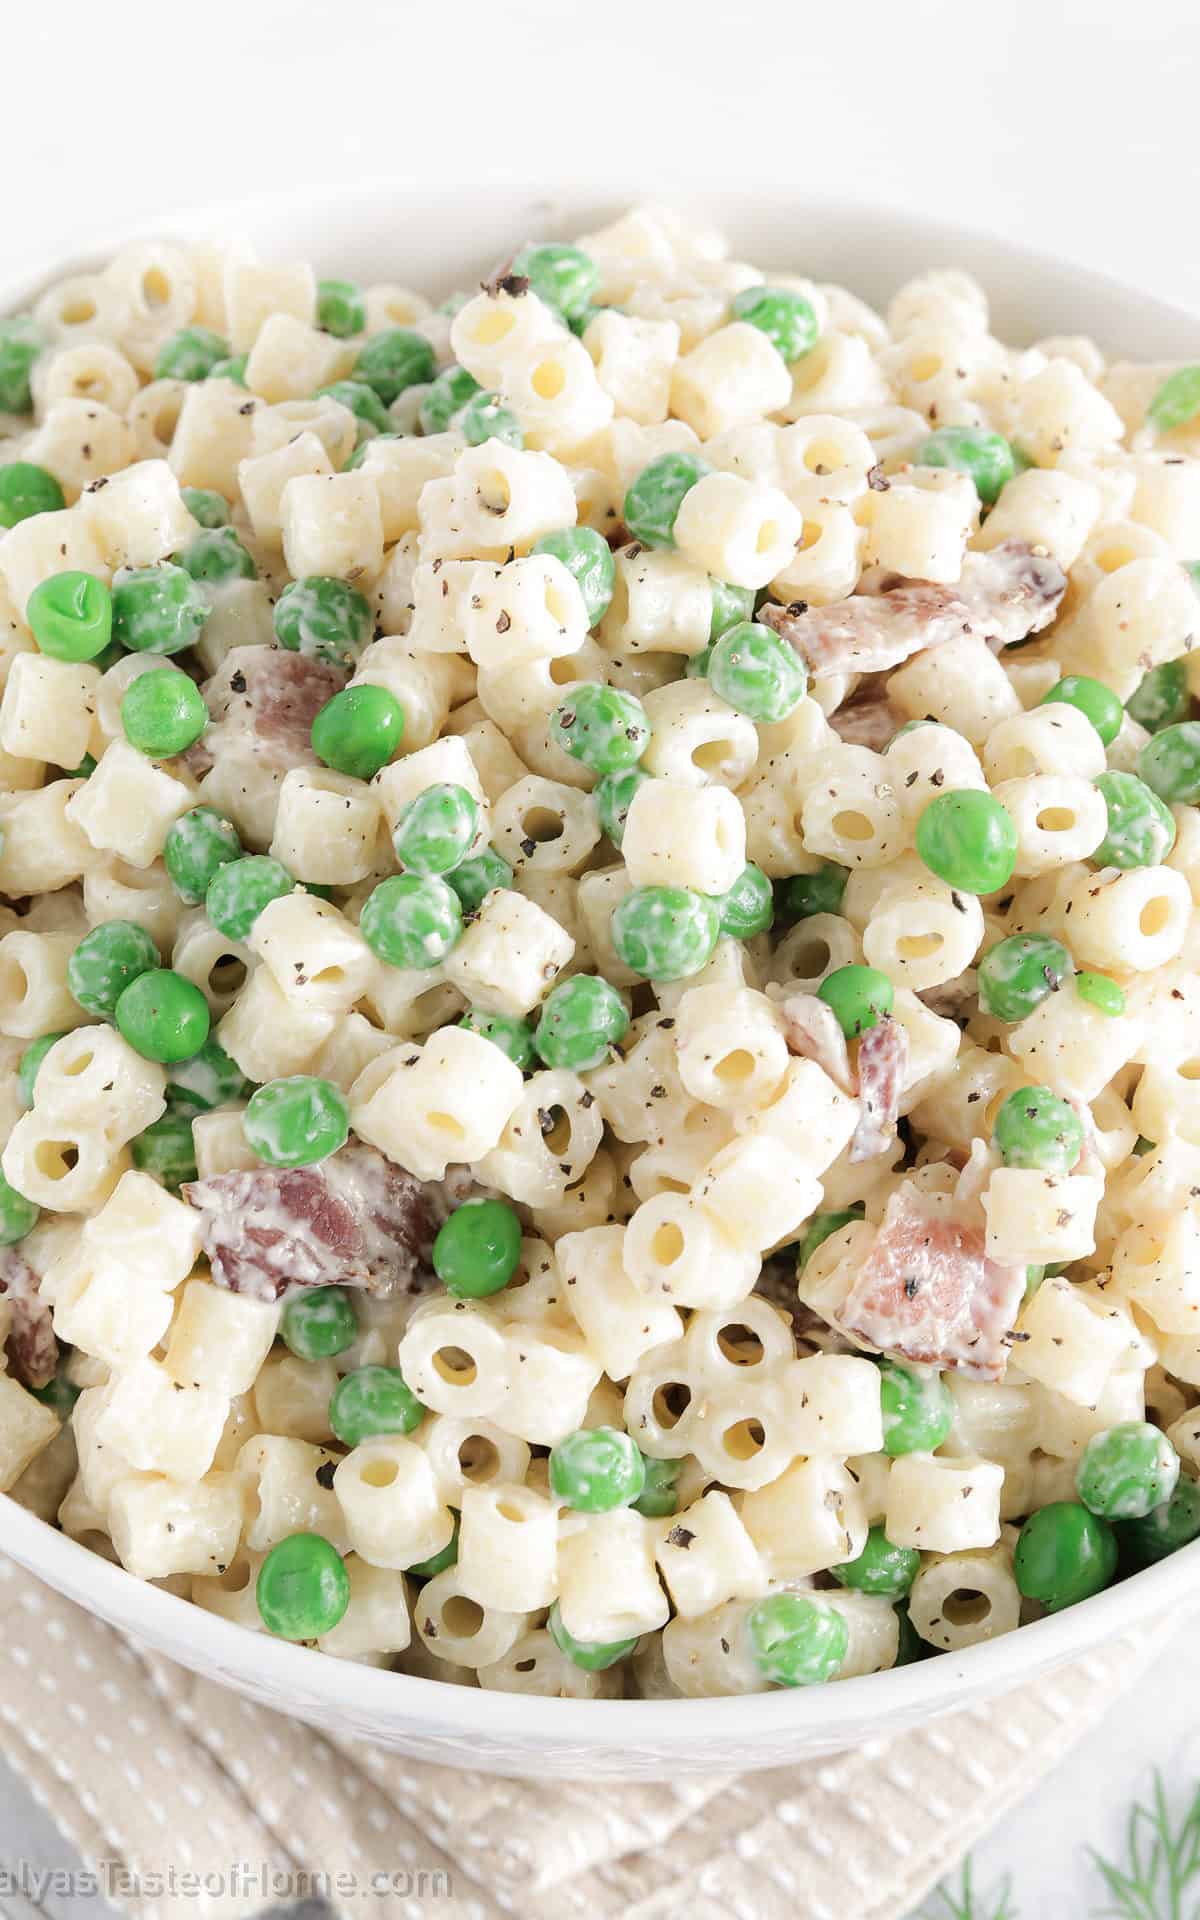 This classic Italian-inspired meal combines the smoky flavor of bacon with the sweetness of peas, all tossed together in a creamy sauce.